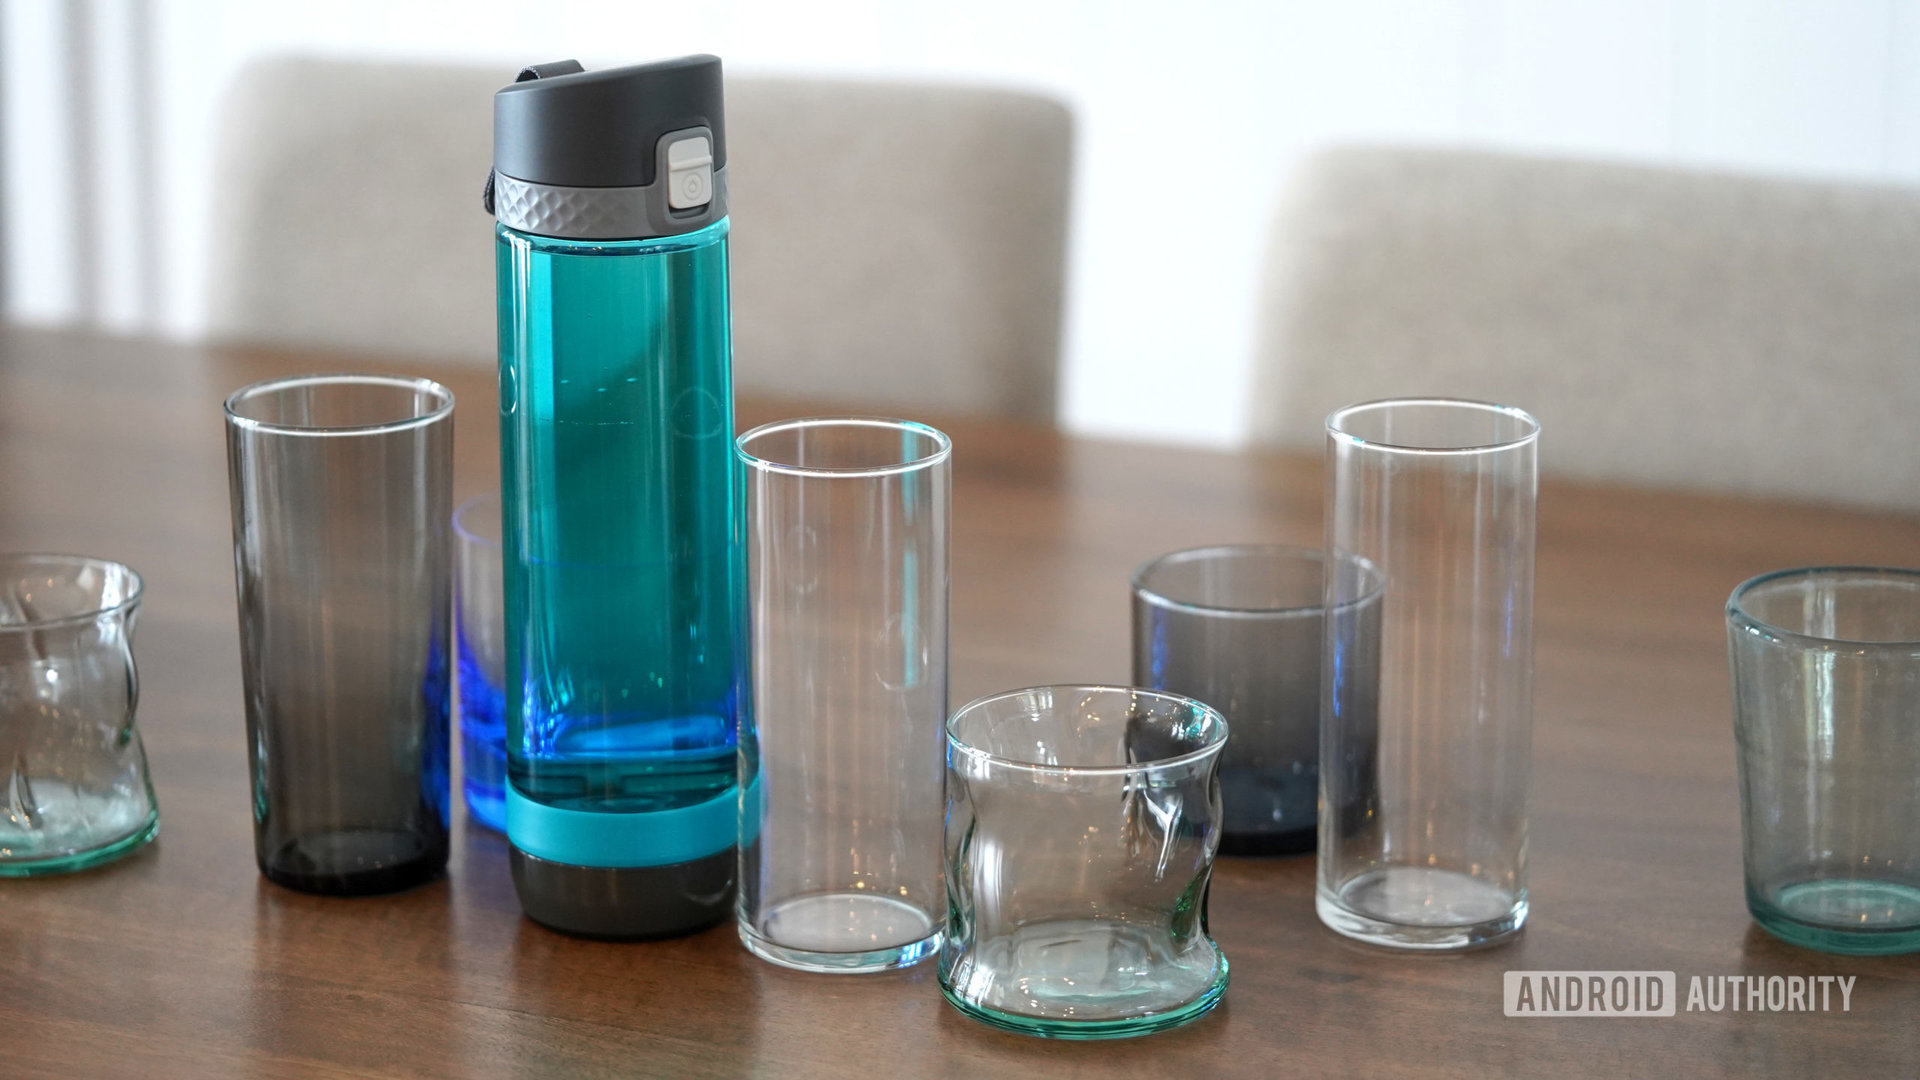 A smart water bottle stands among empty water glasses.